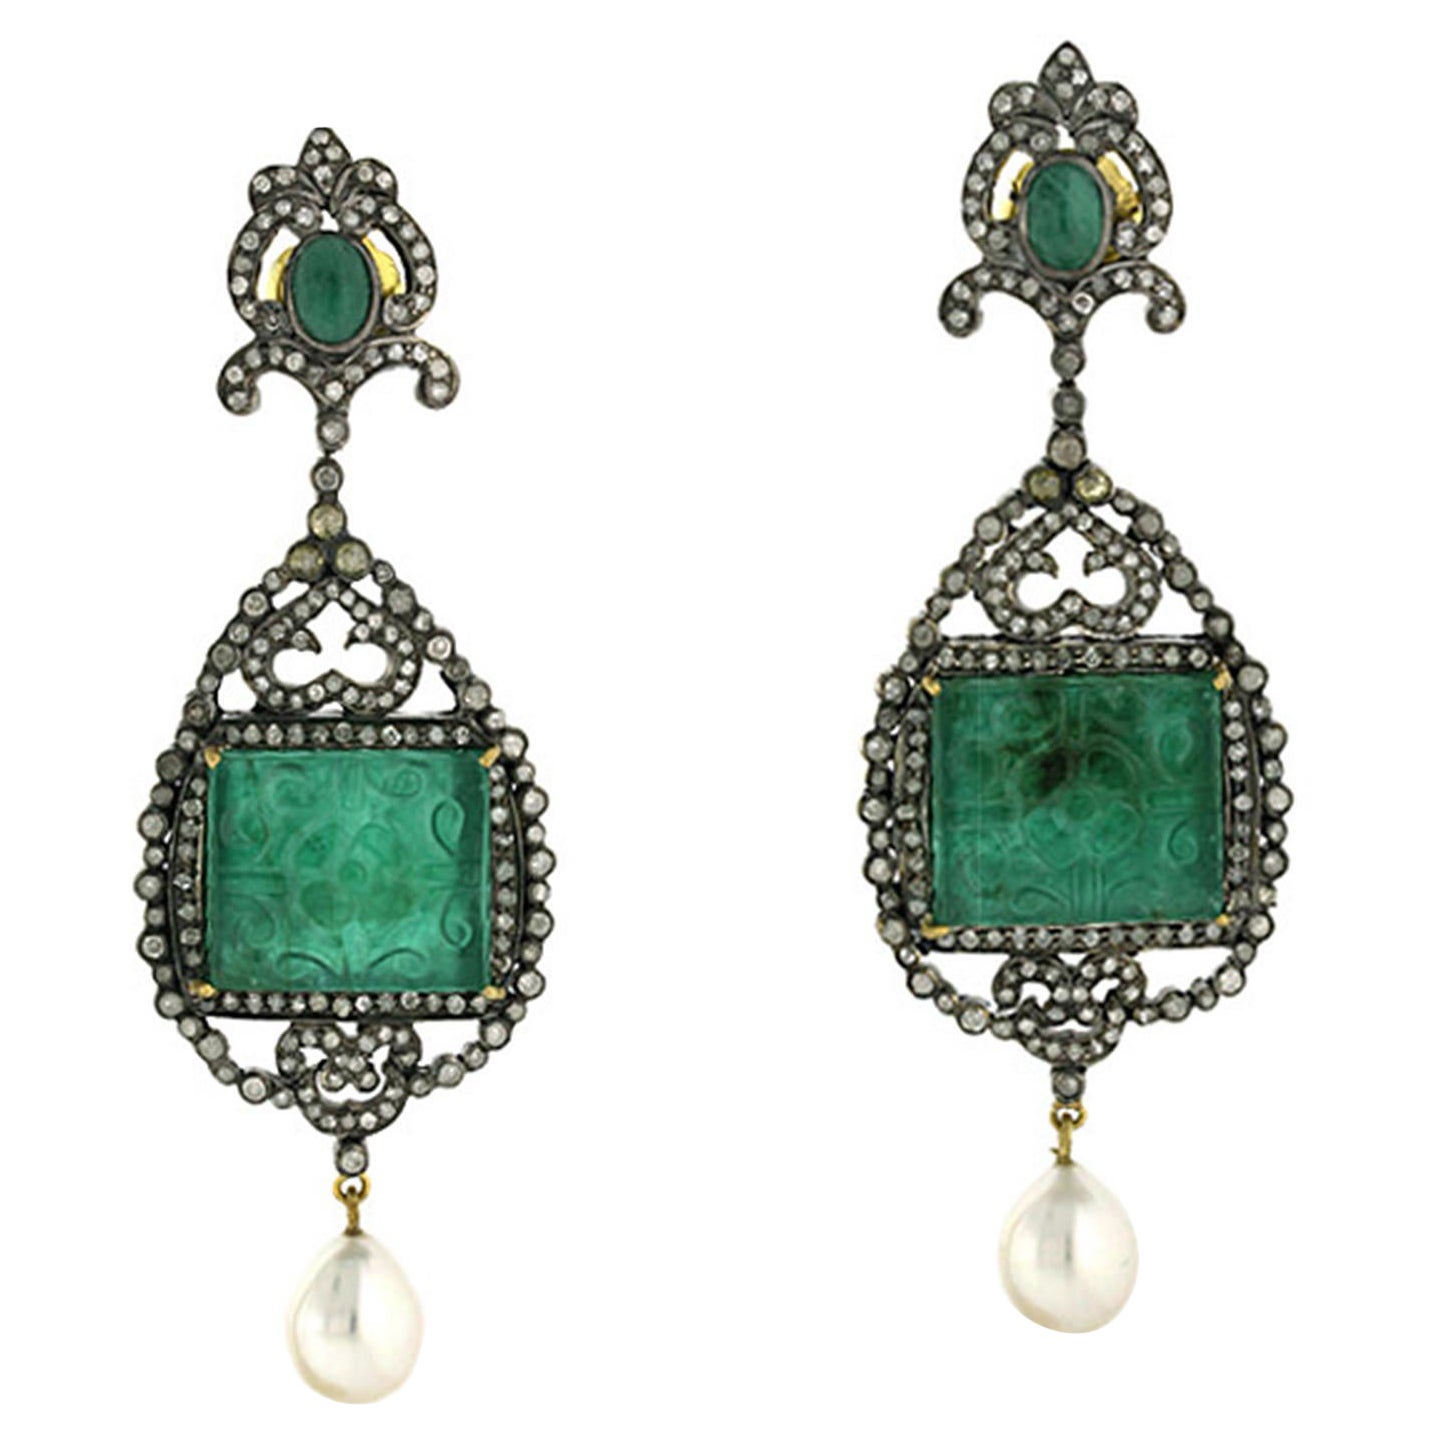 Carved Emerald & Pearl Dangle Earrings with Diamonds Made in 18k Gold & Silver